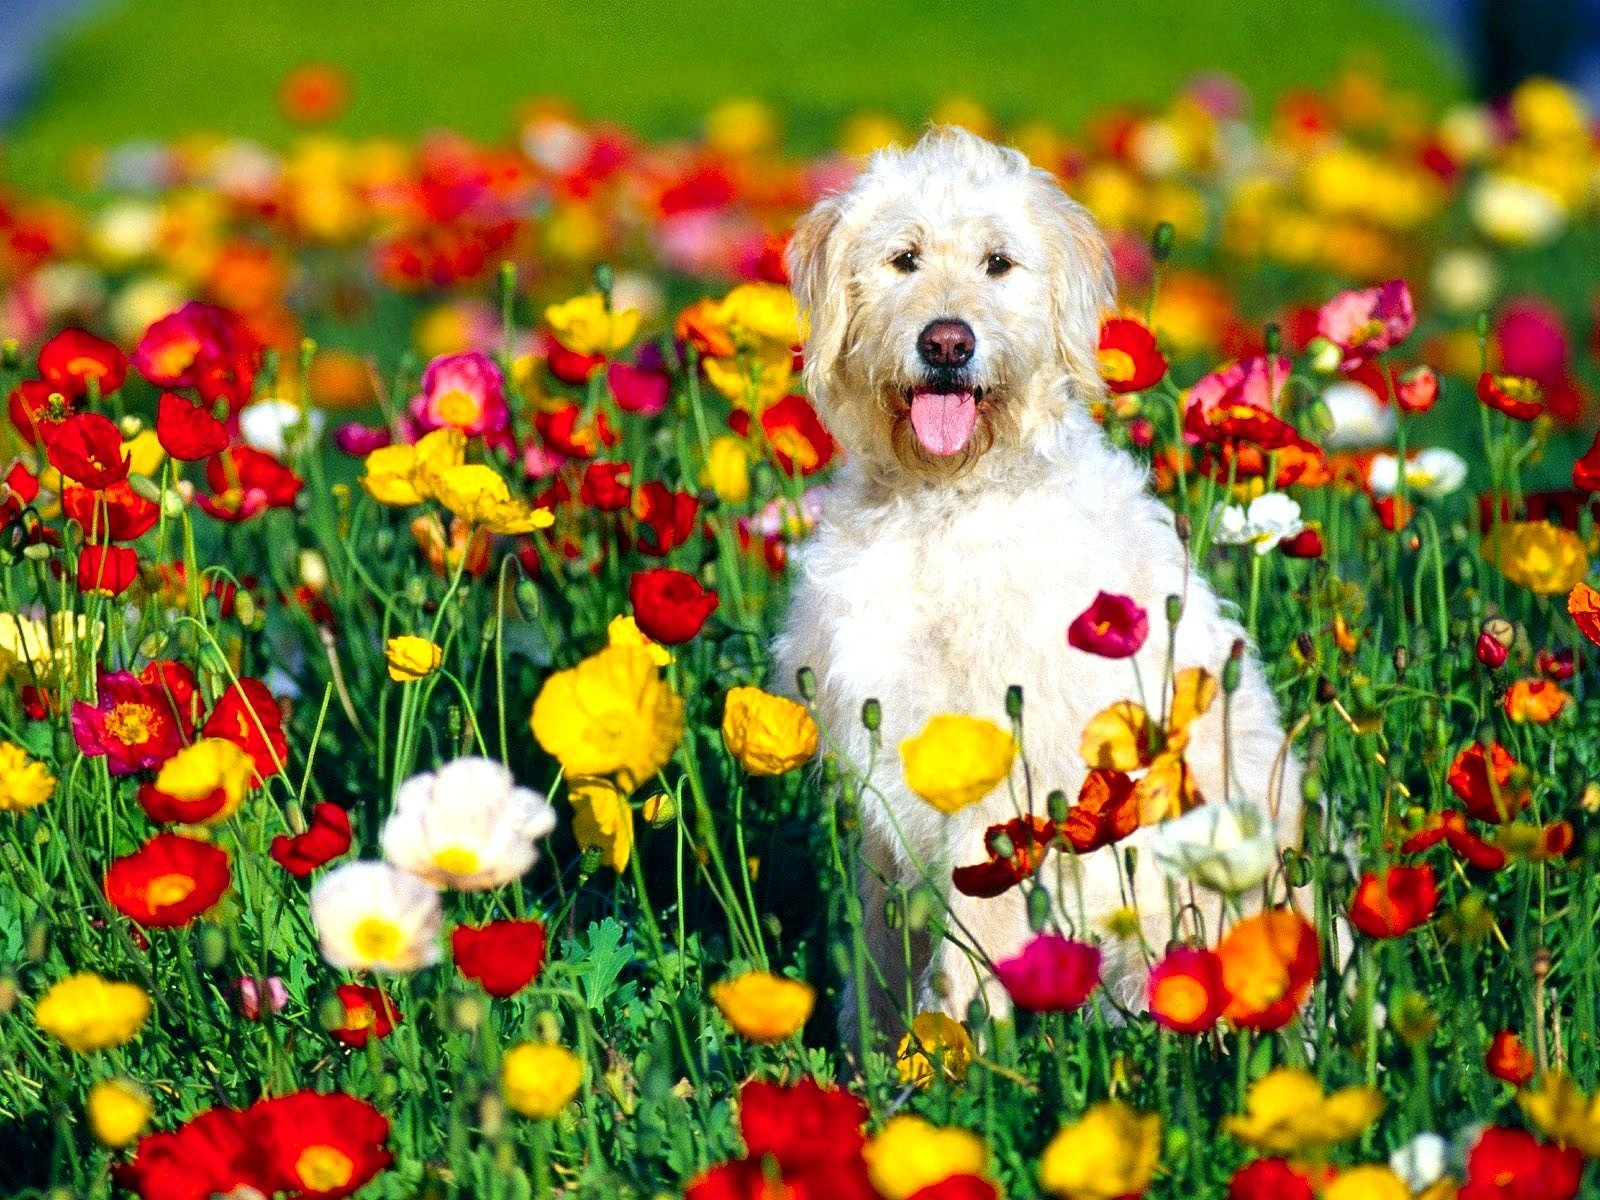 NaturVet the first day of Spring with your furry friends!